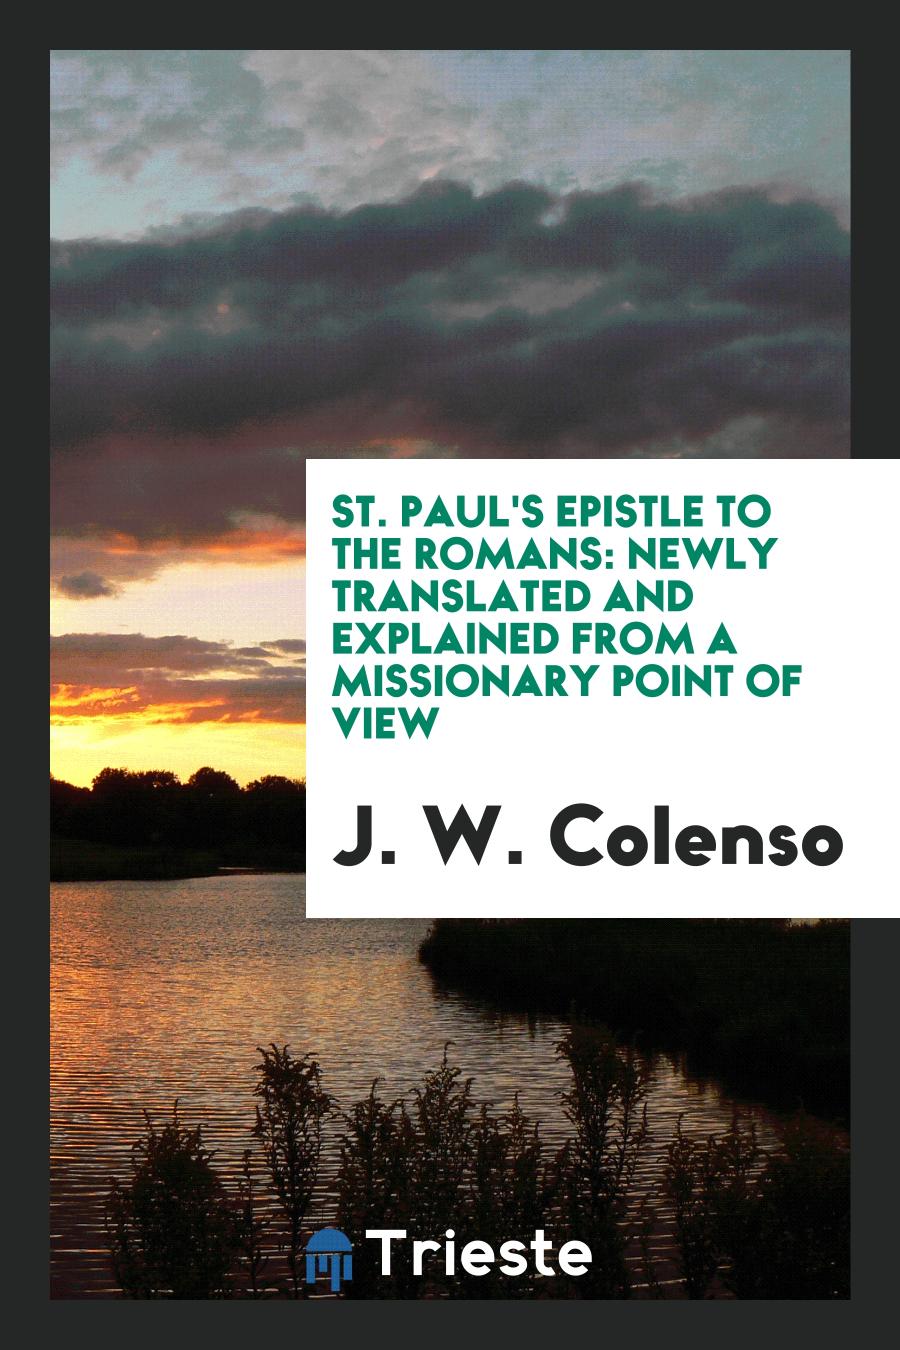 St. Paul's Epistle to the Romans: Newly Translated and Explained from a Missionary Point of View